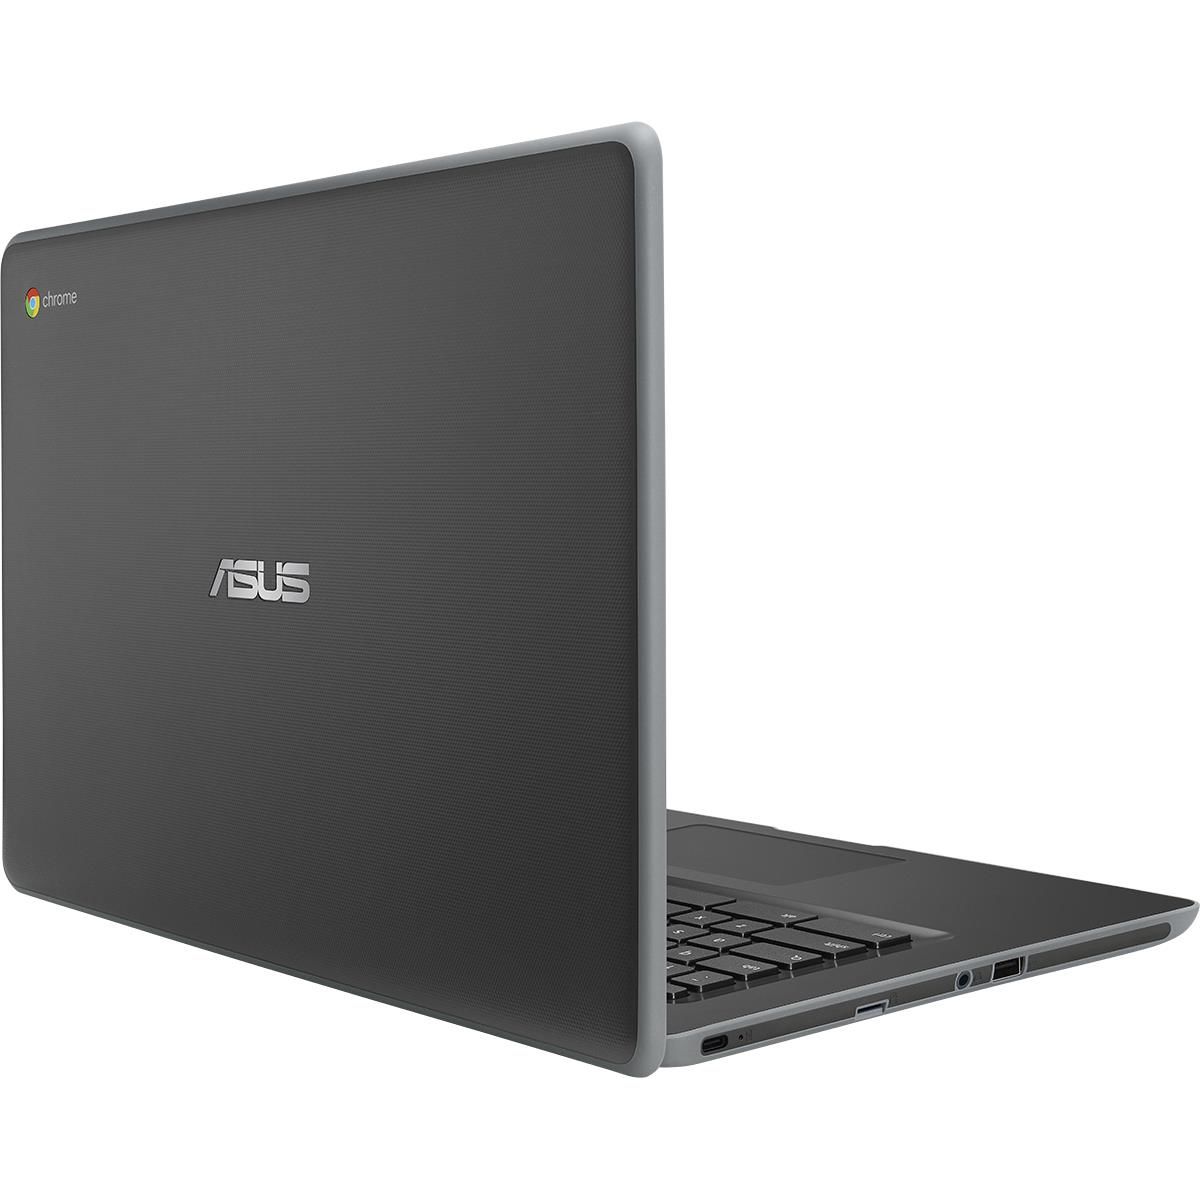 ASUS Chromebook C403NA-FQ0004 - 90NX01P1-M00040 laptop specifications